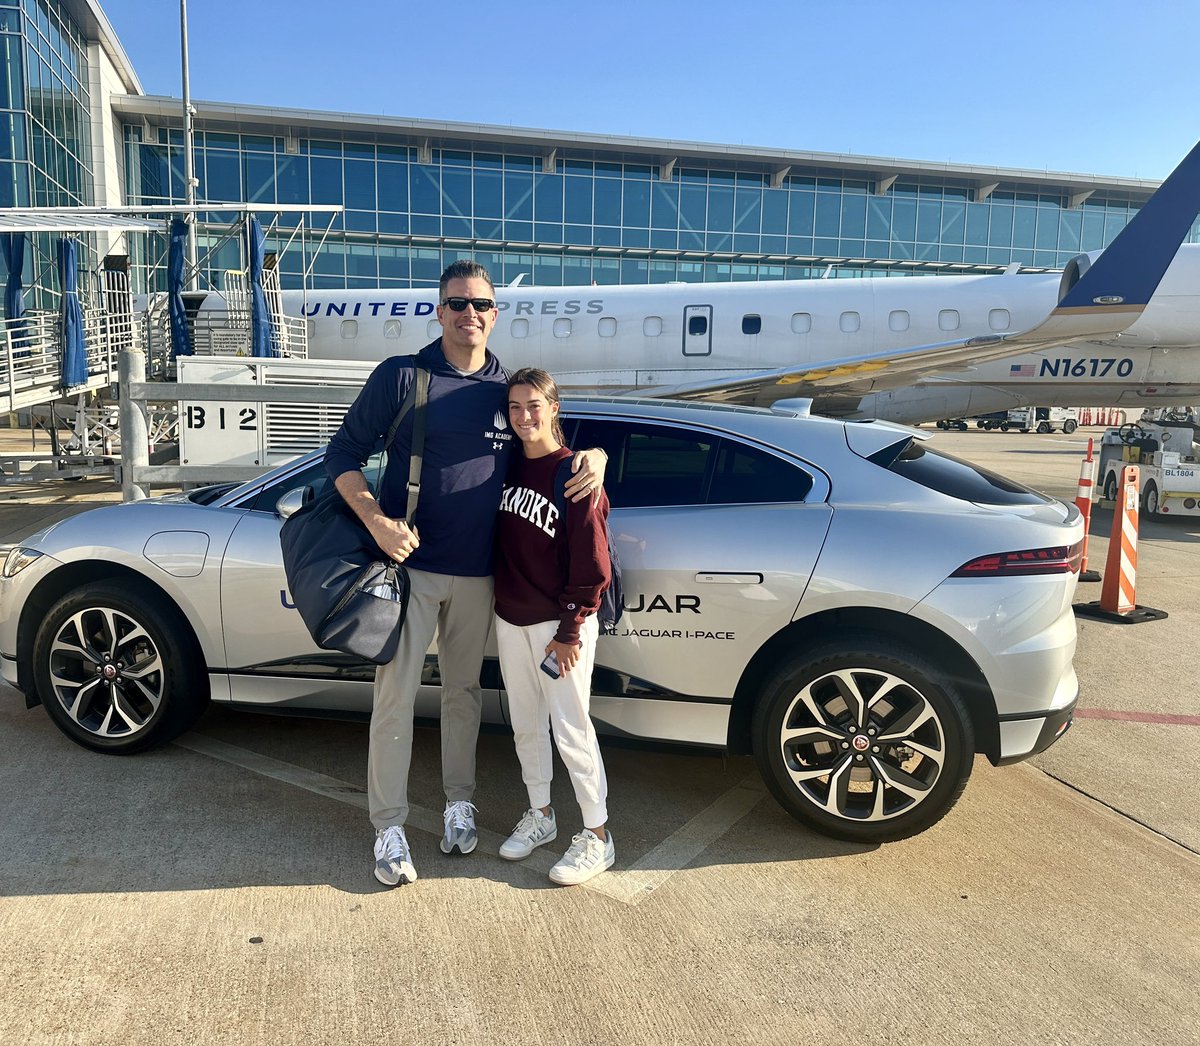 Details are Important and Experience Matters…Thank you @united for again going above and beyond…the smooth ride in the @Jaguar I-Pace to our connection @iah made our day.